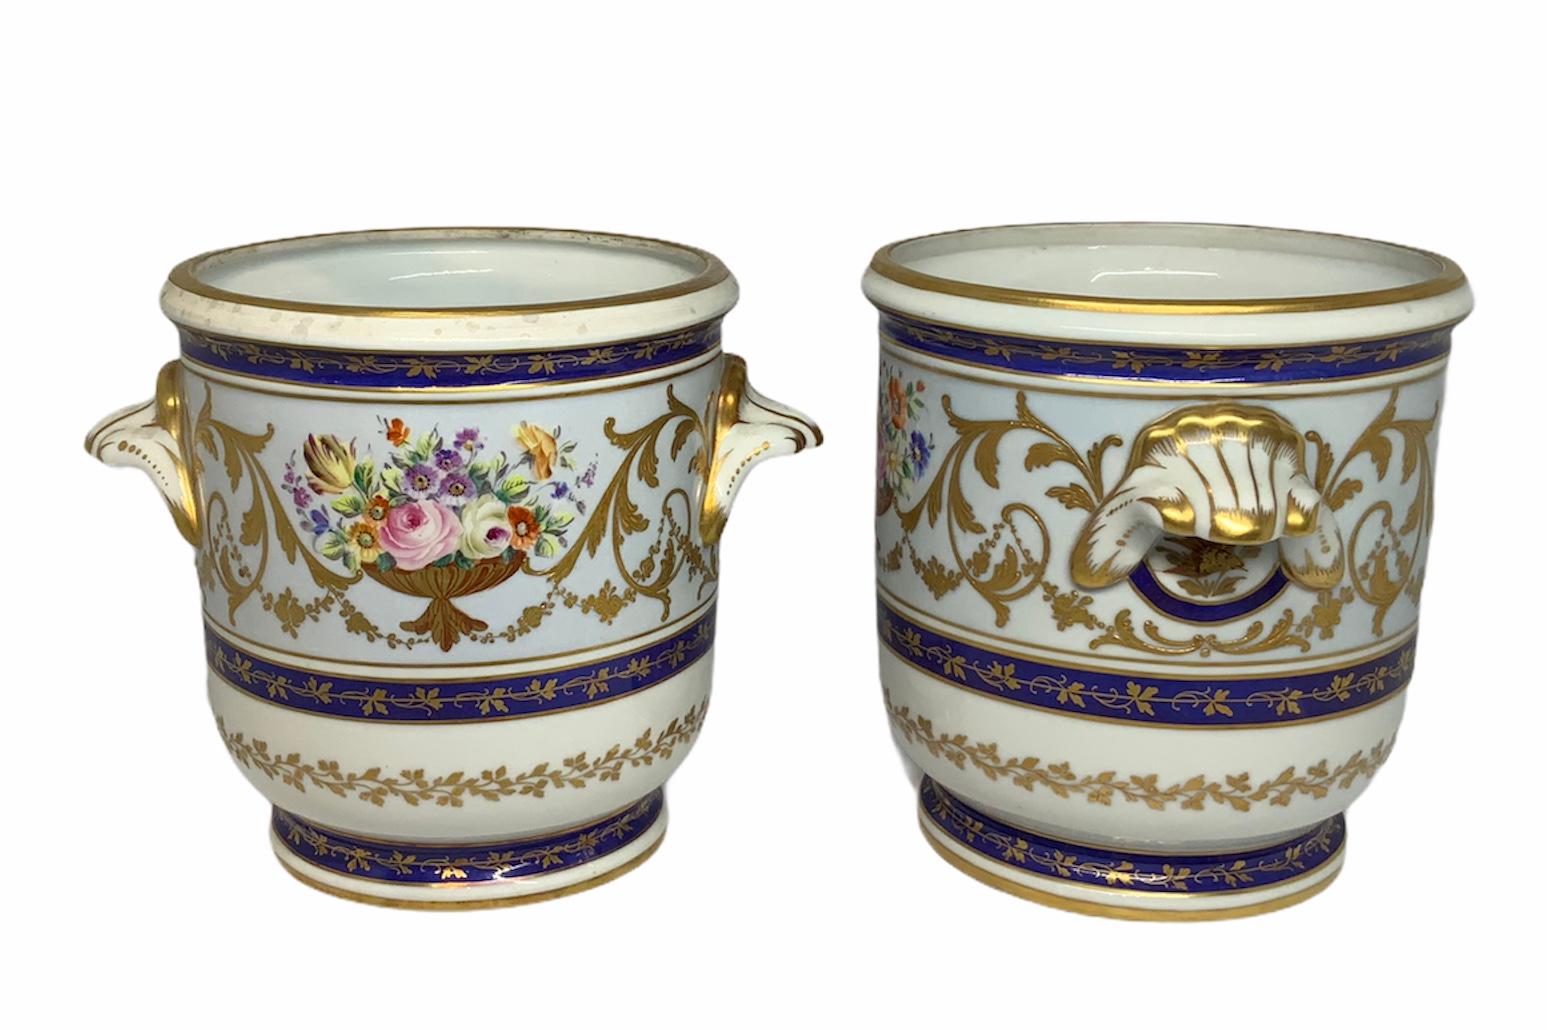 This a set of hand painted Porcelain cachepots depicting a decoration in a gilded centerpiece of a flower arrangement in the front and gilt acanthus growing along the diameter sides of it . Also, there are three hand painted cobalt blue rings around